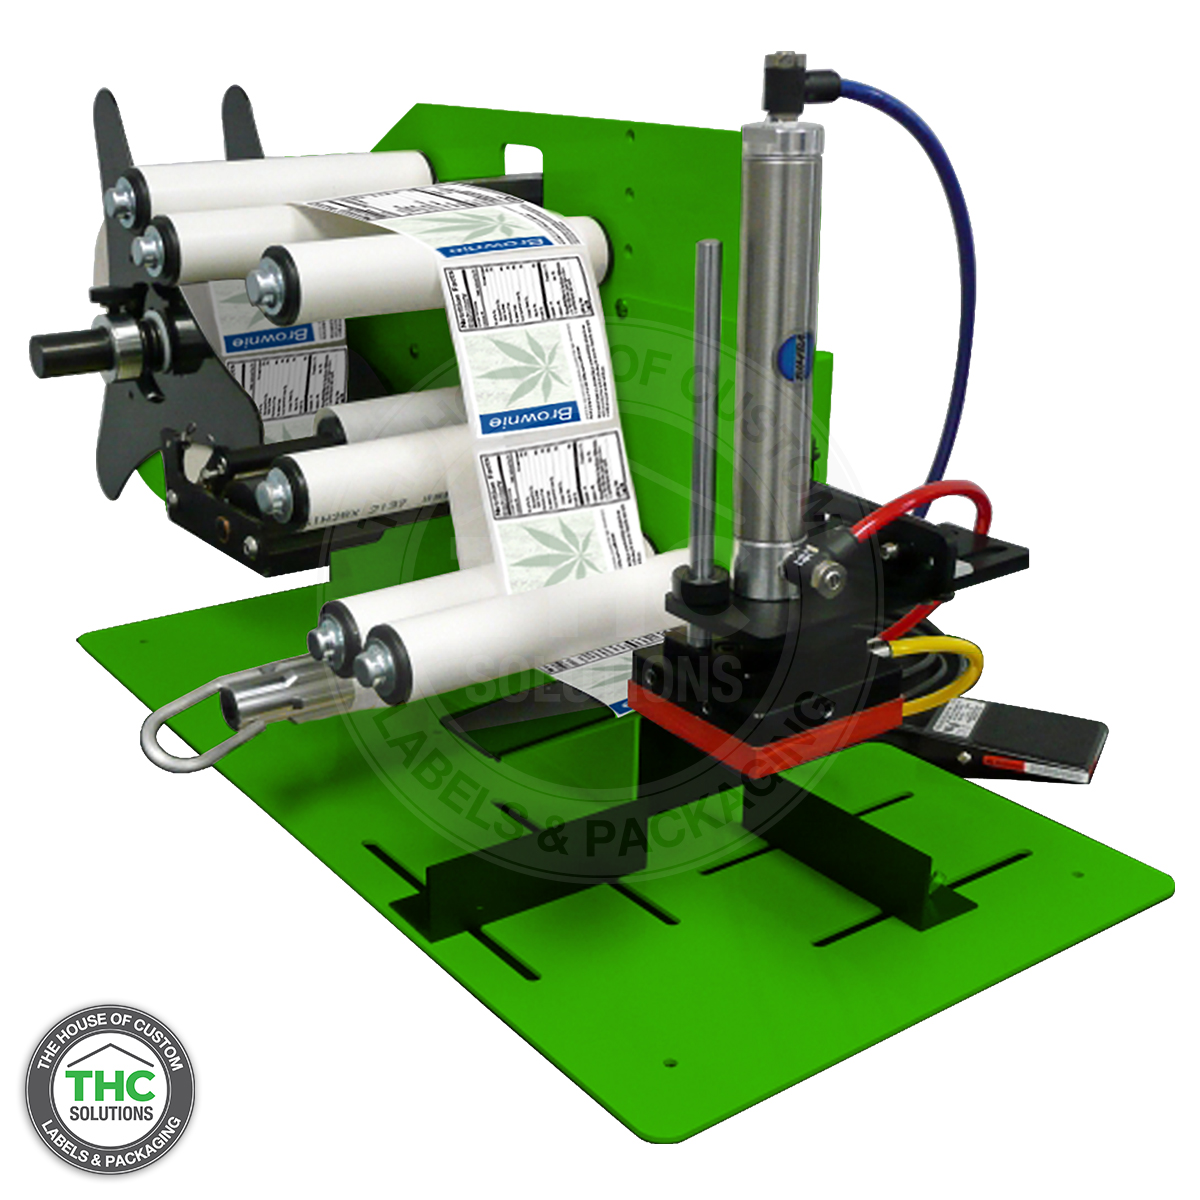 THC Tapper Pro Label Applicator (Air Compressor required)